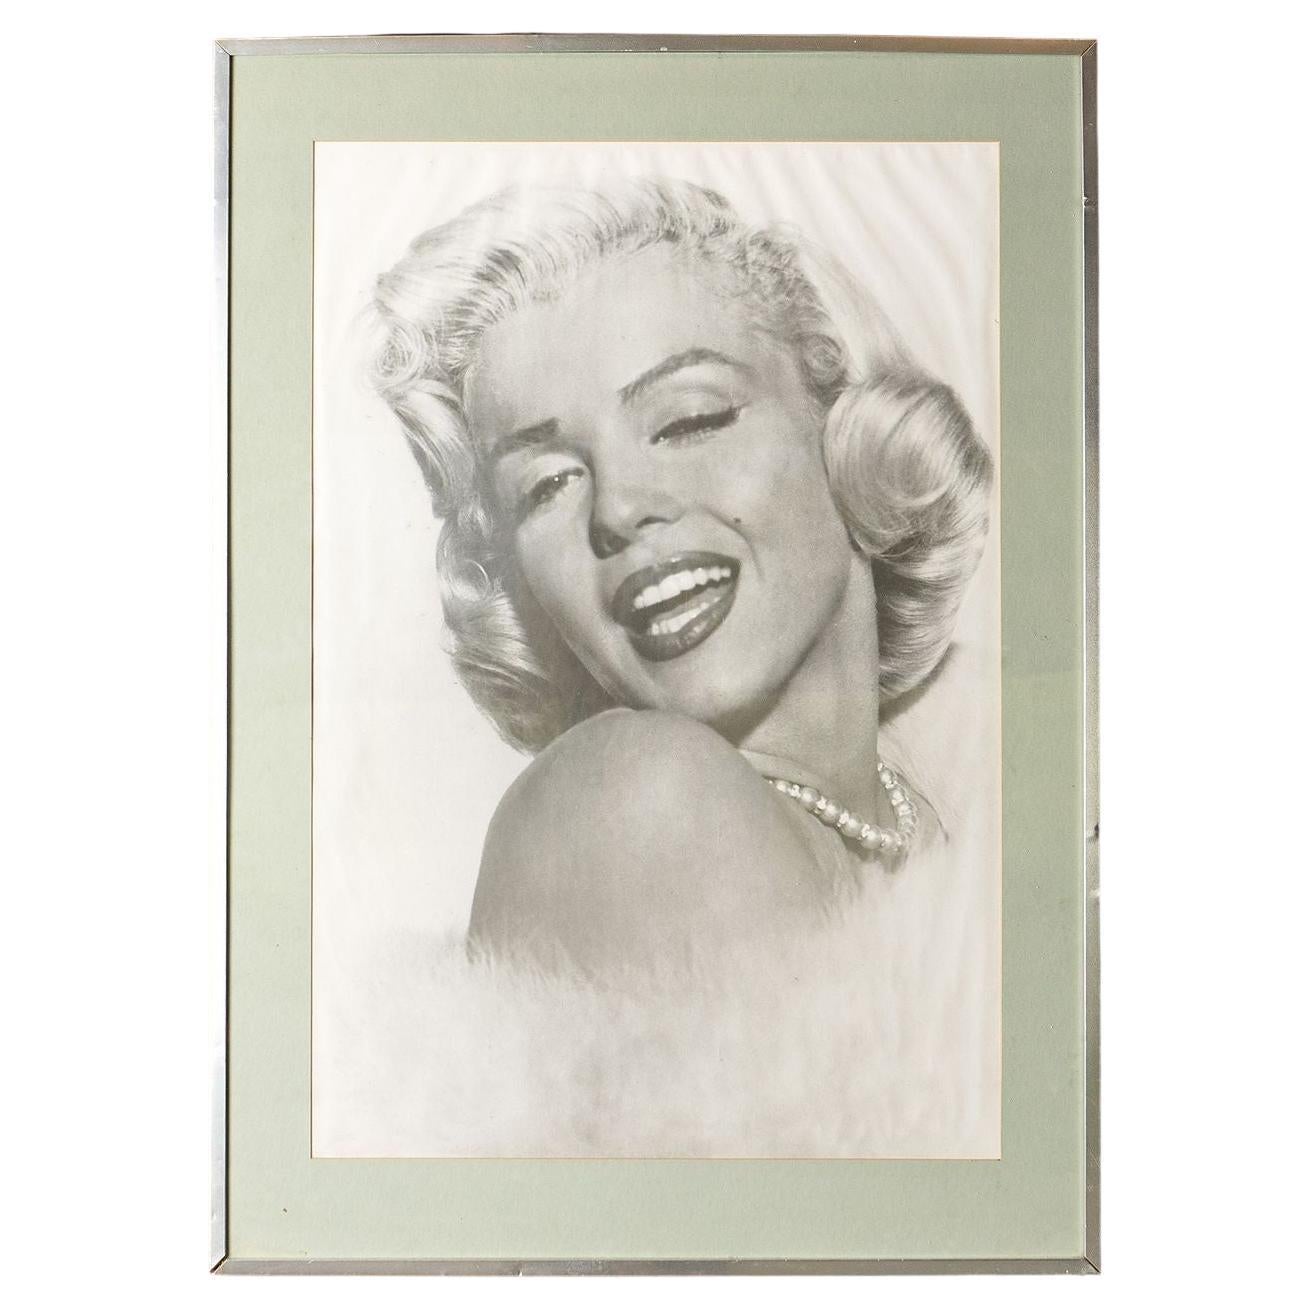 Large Vintage Marilyn Monroe Photographic Portrait Print by Frank Powolny, 1970s